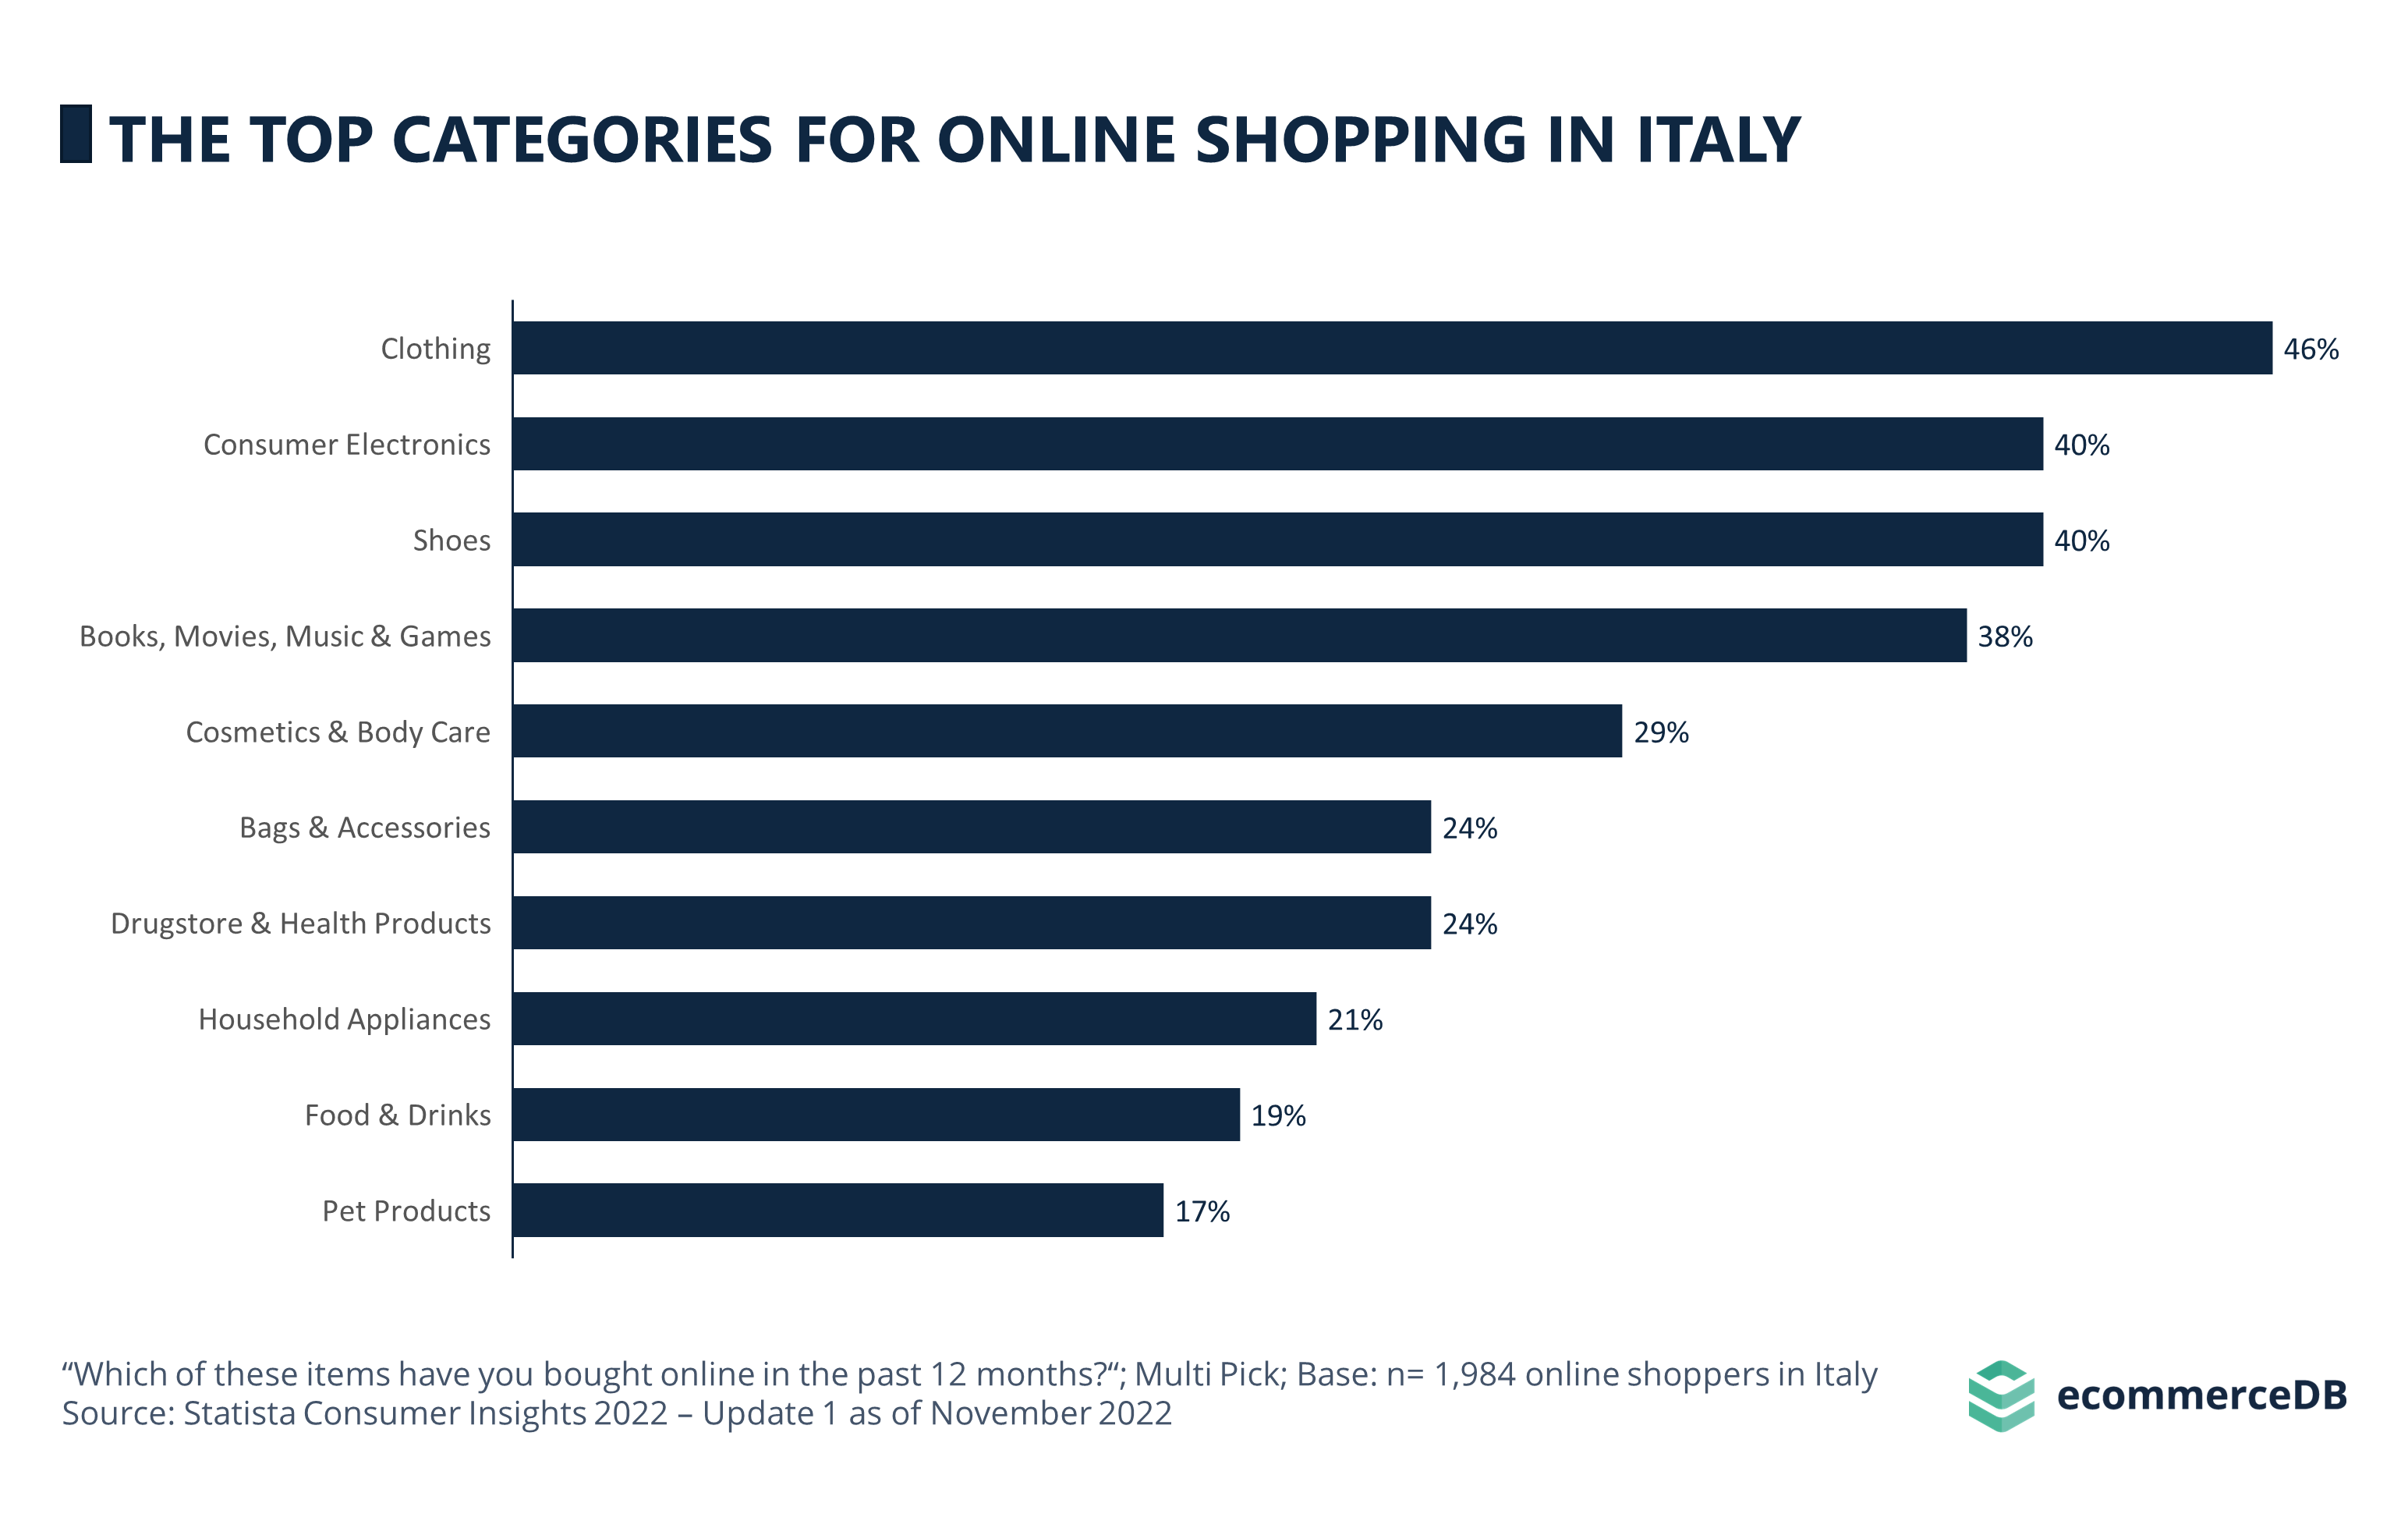 THE TOP CATEGORIES FOR ONLINE SHOPPING IN ITALY